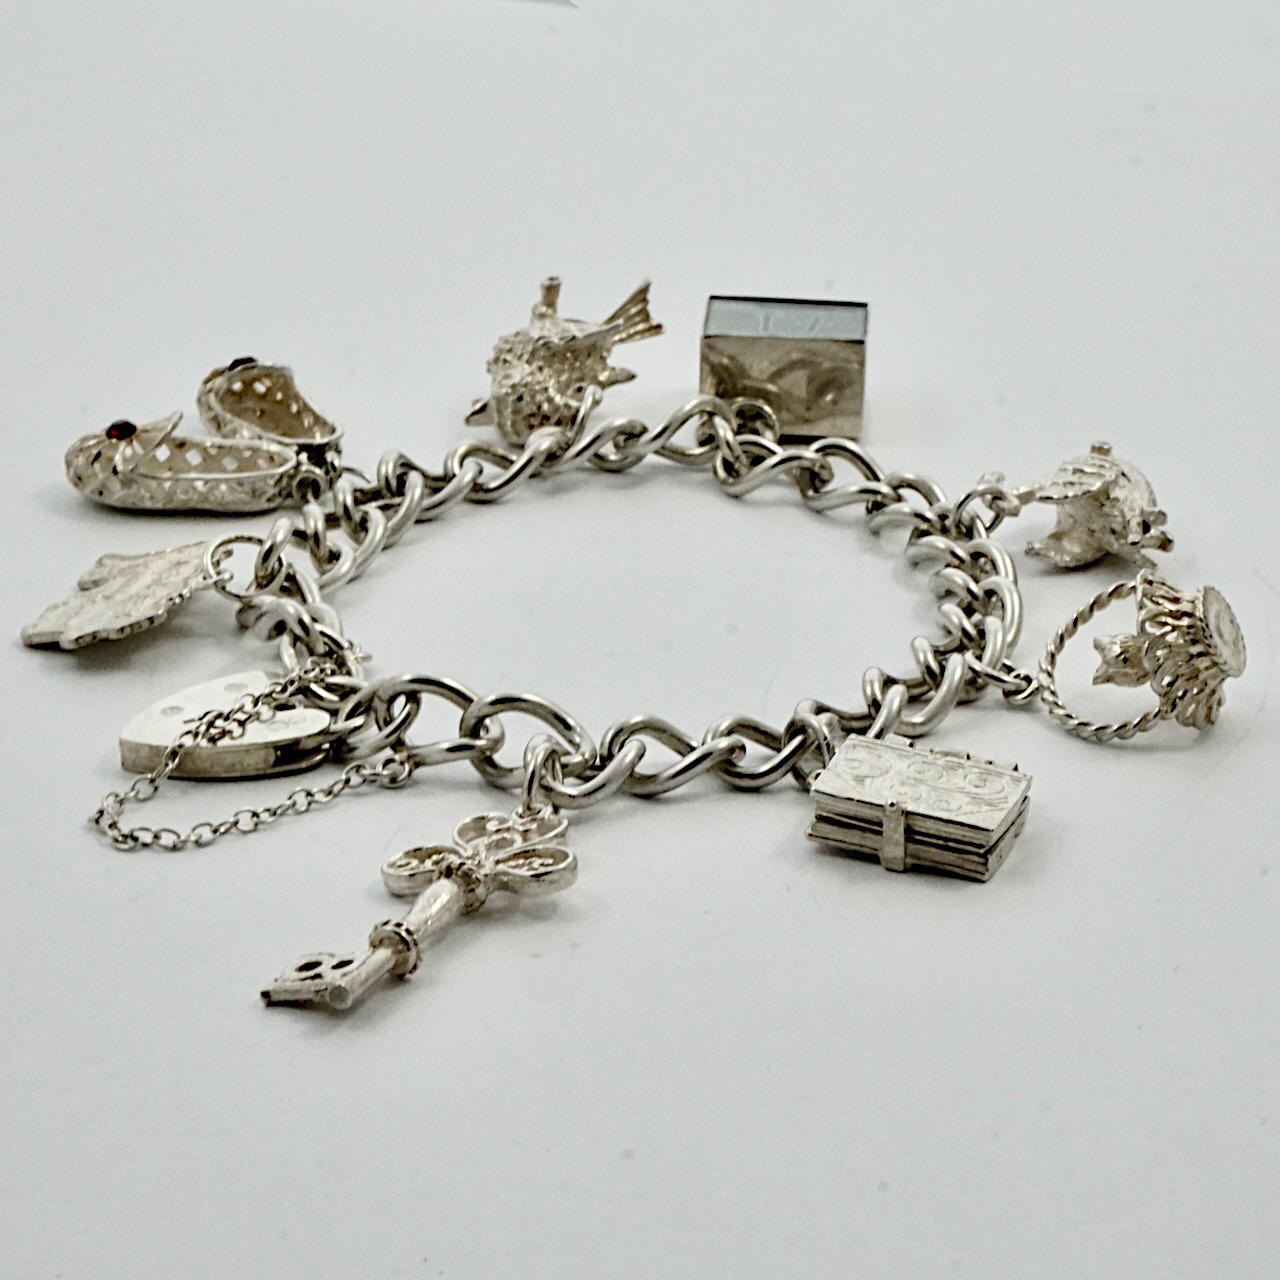 Delightful English sterling silver charm bracelet with a heart lock and chain. There are eight charms: 18 key, opening bible with verses inside, cat in a basket, opening swan with a ballerina inside, encased emergency £1 note, bird, red jewelled